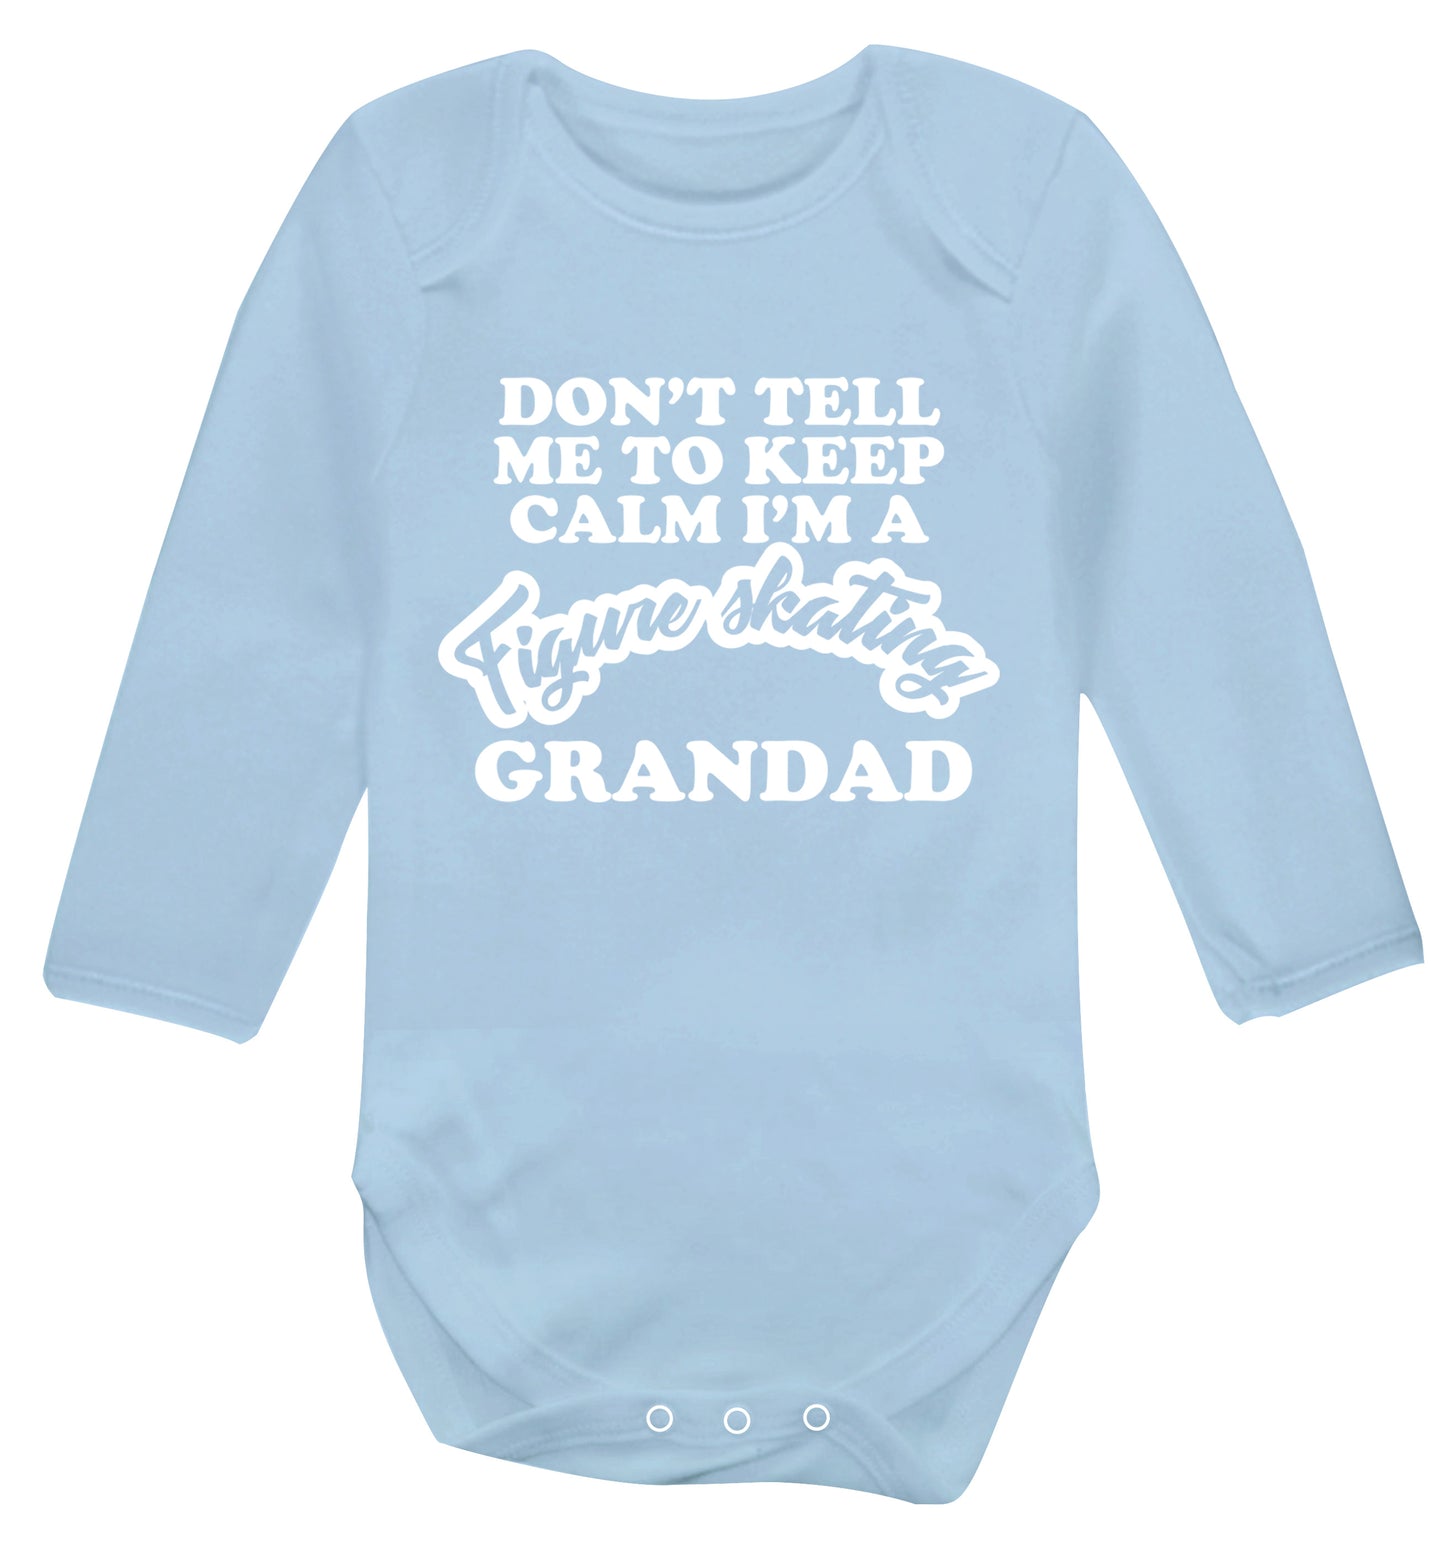 Don't tell me to keep calm I'm a figure skating grandad Baby Vest long sleeved pale blue 6-12 months